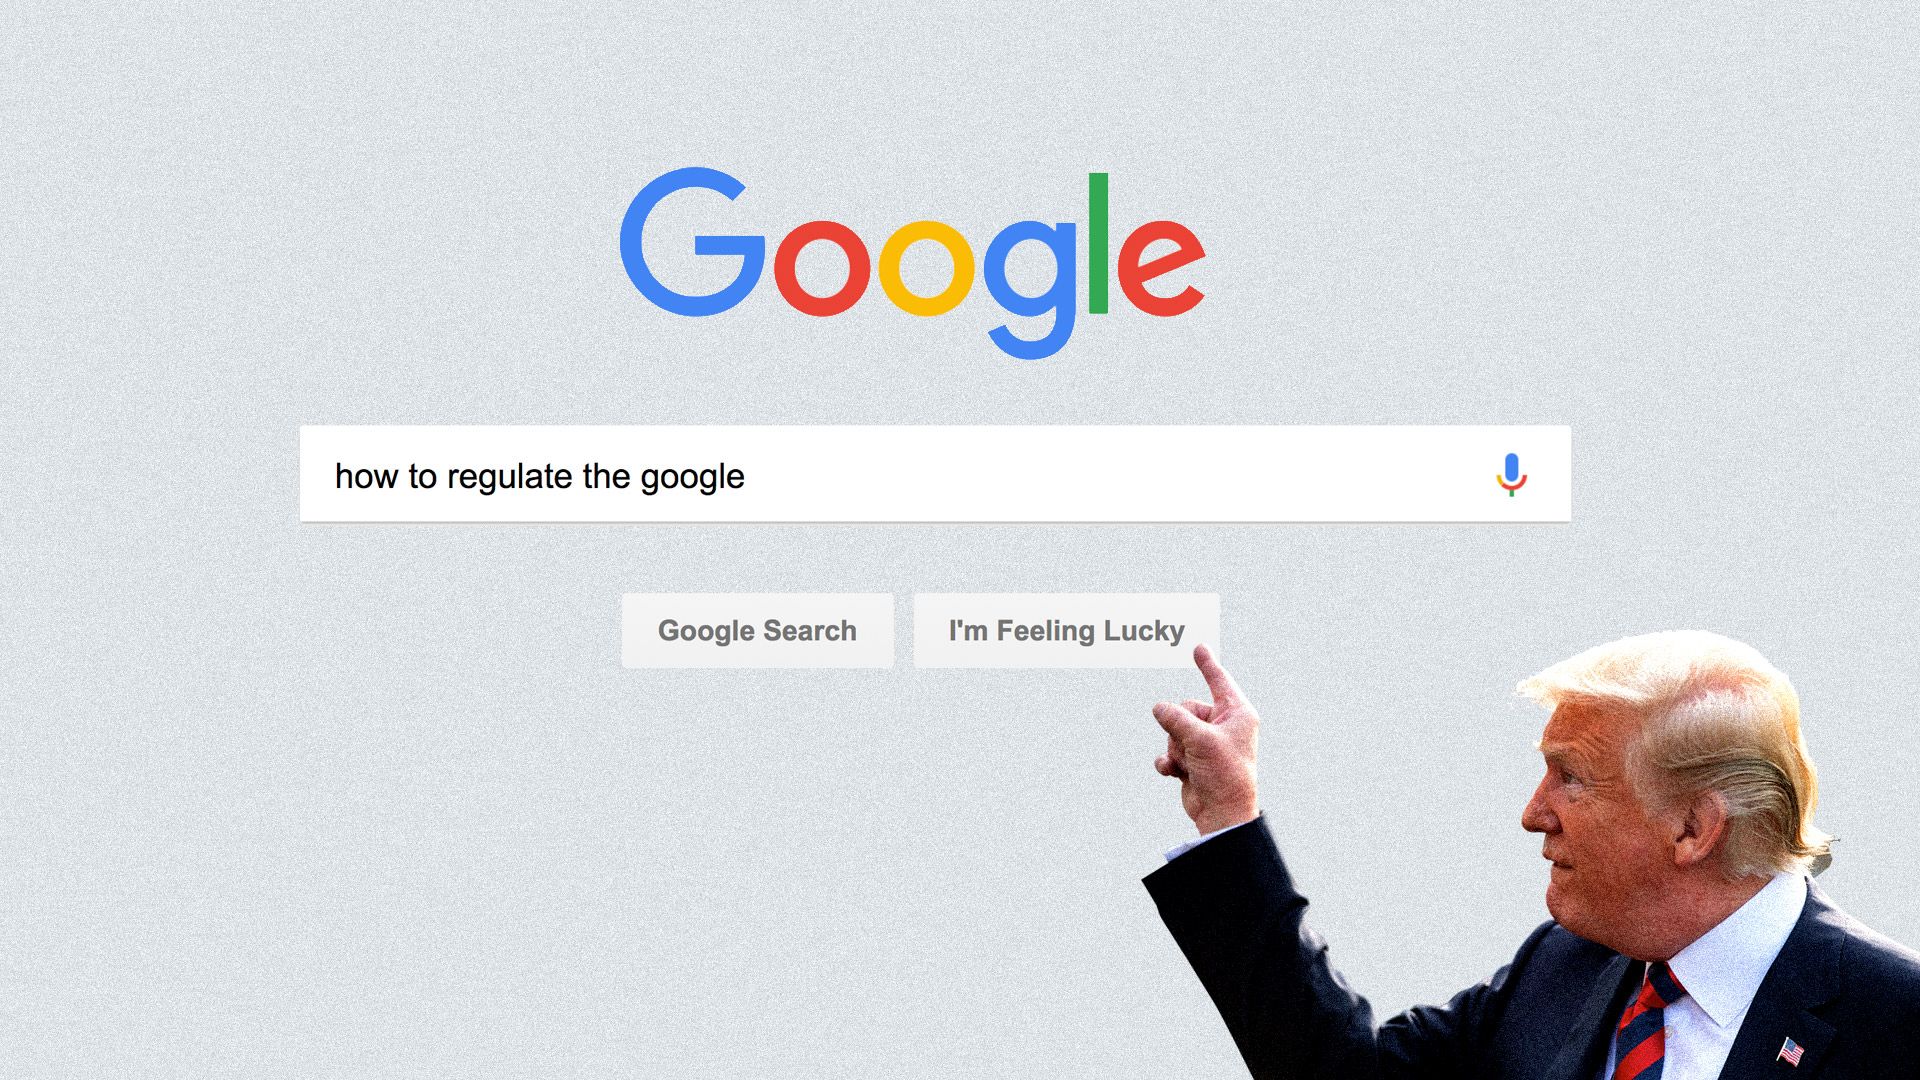 Here is President Trump pointing at a Google search